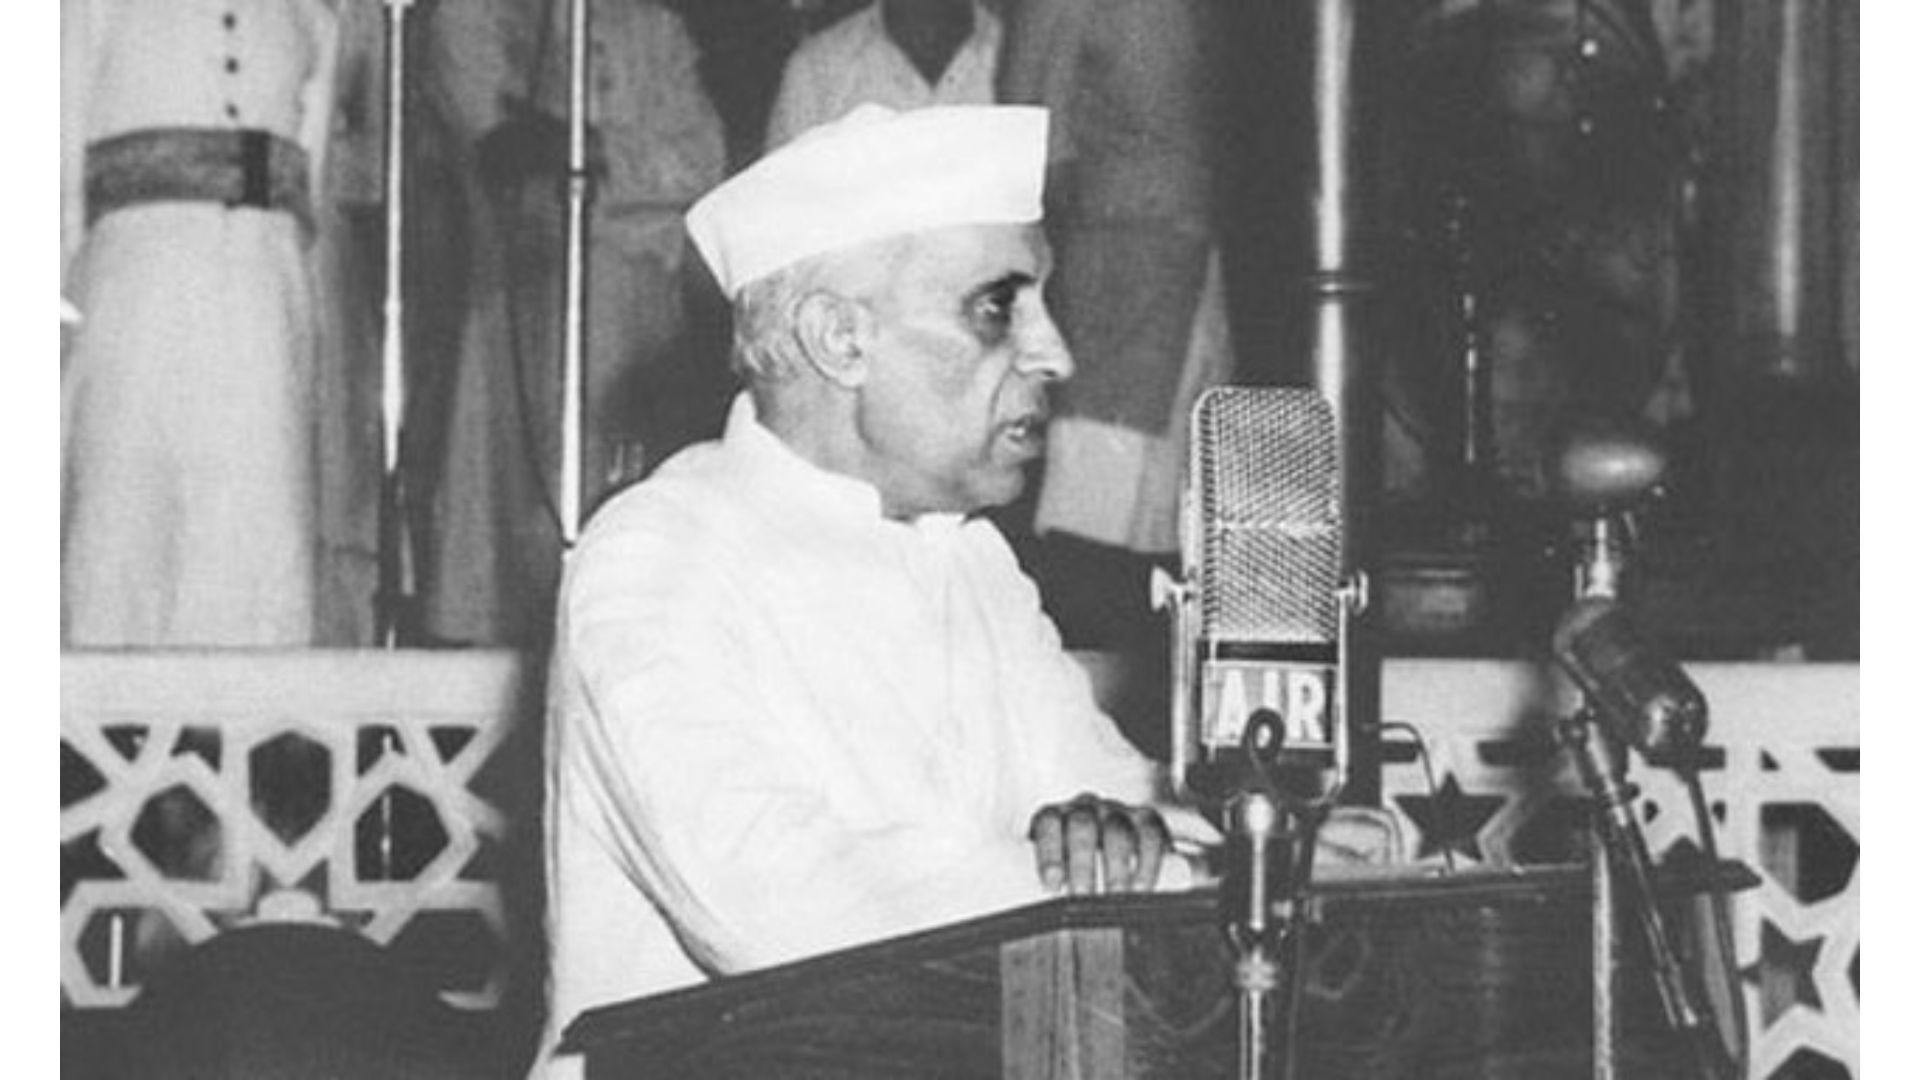 Nehru giving his 'Tryst with destiny' speech | Wikimedia Commons